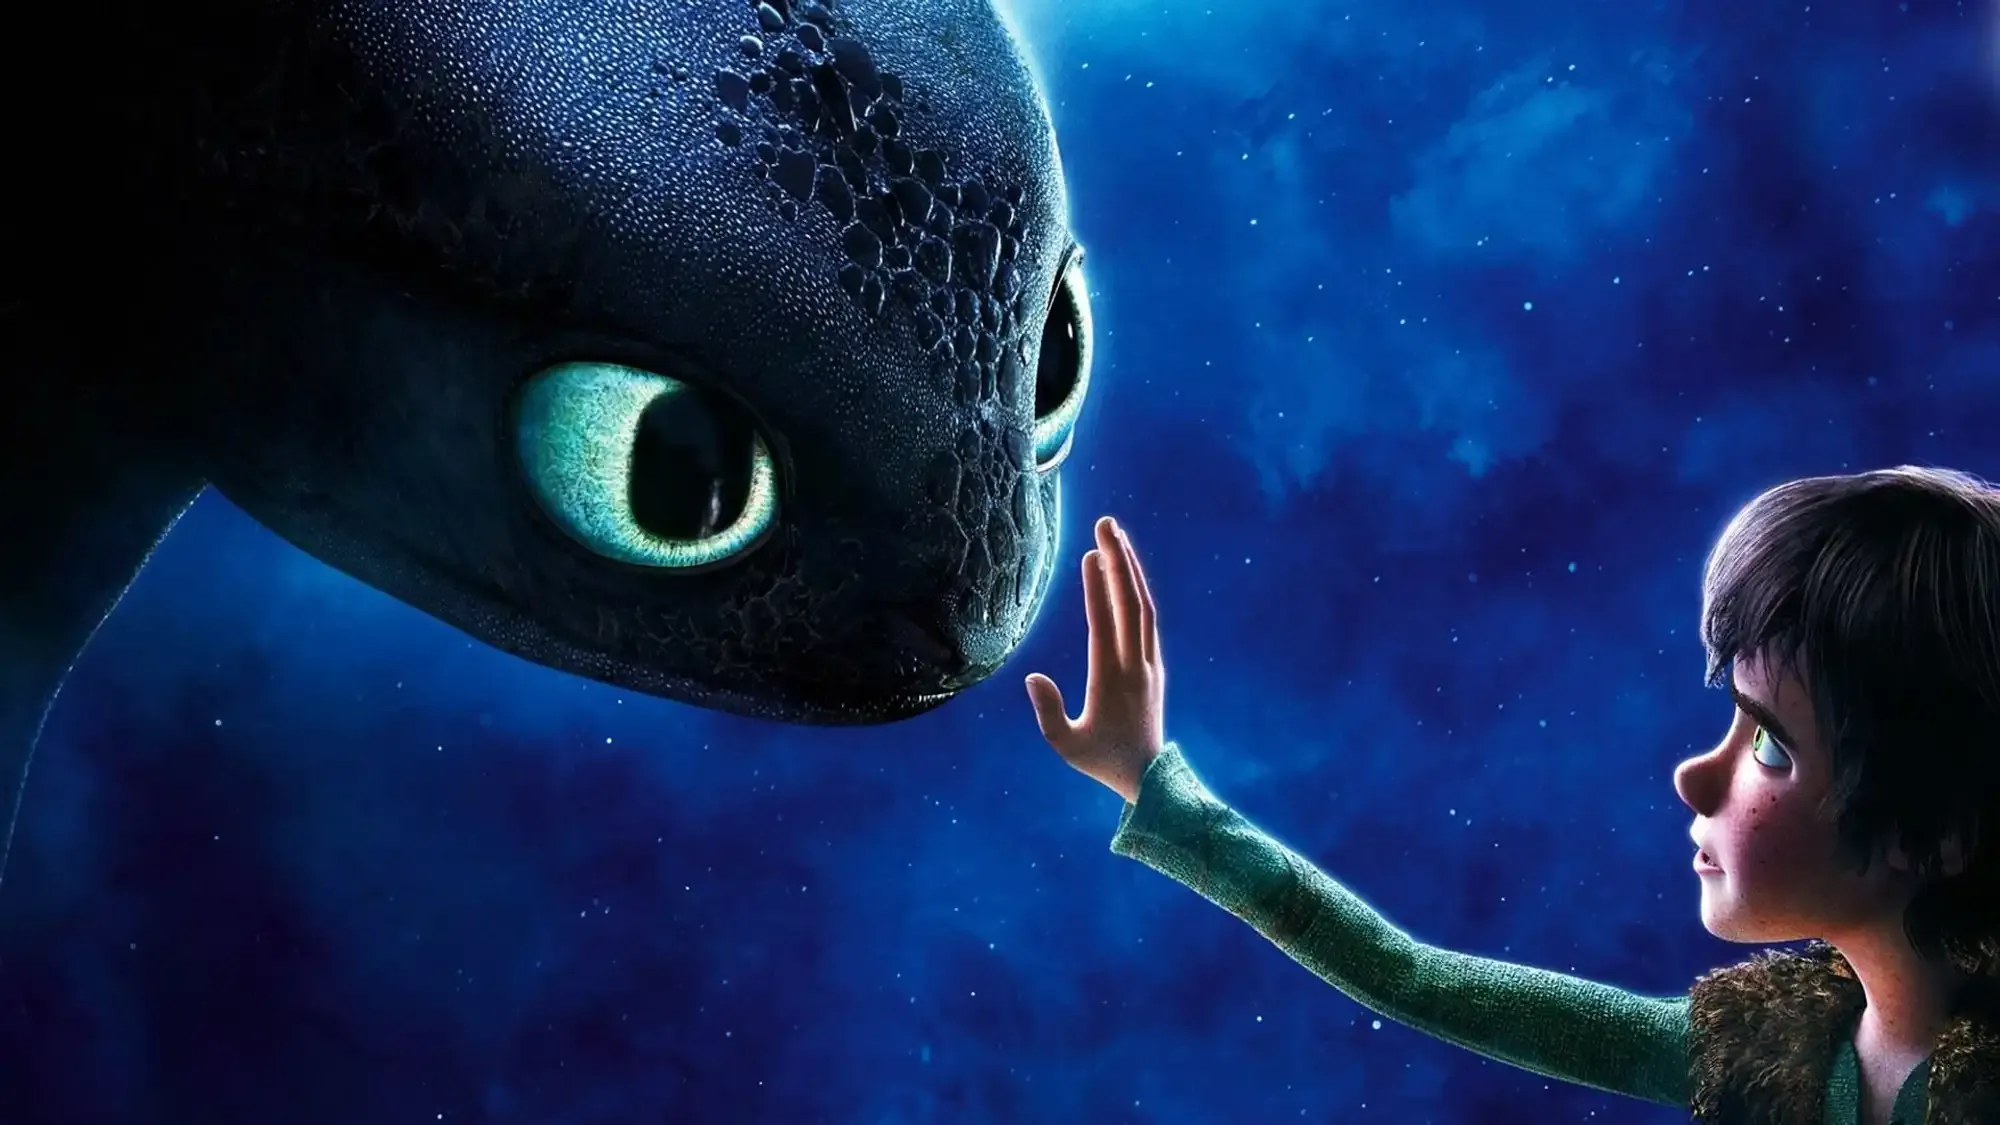 How to Train Your Dragon movie review